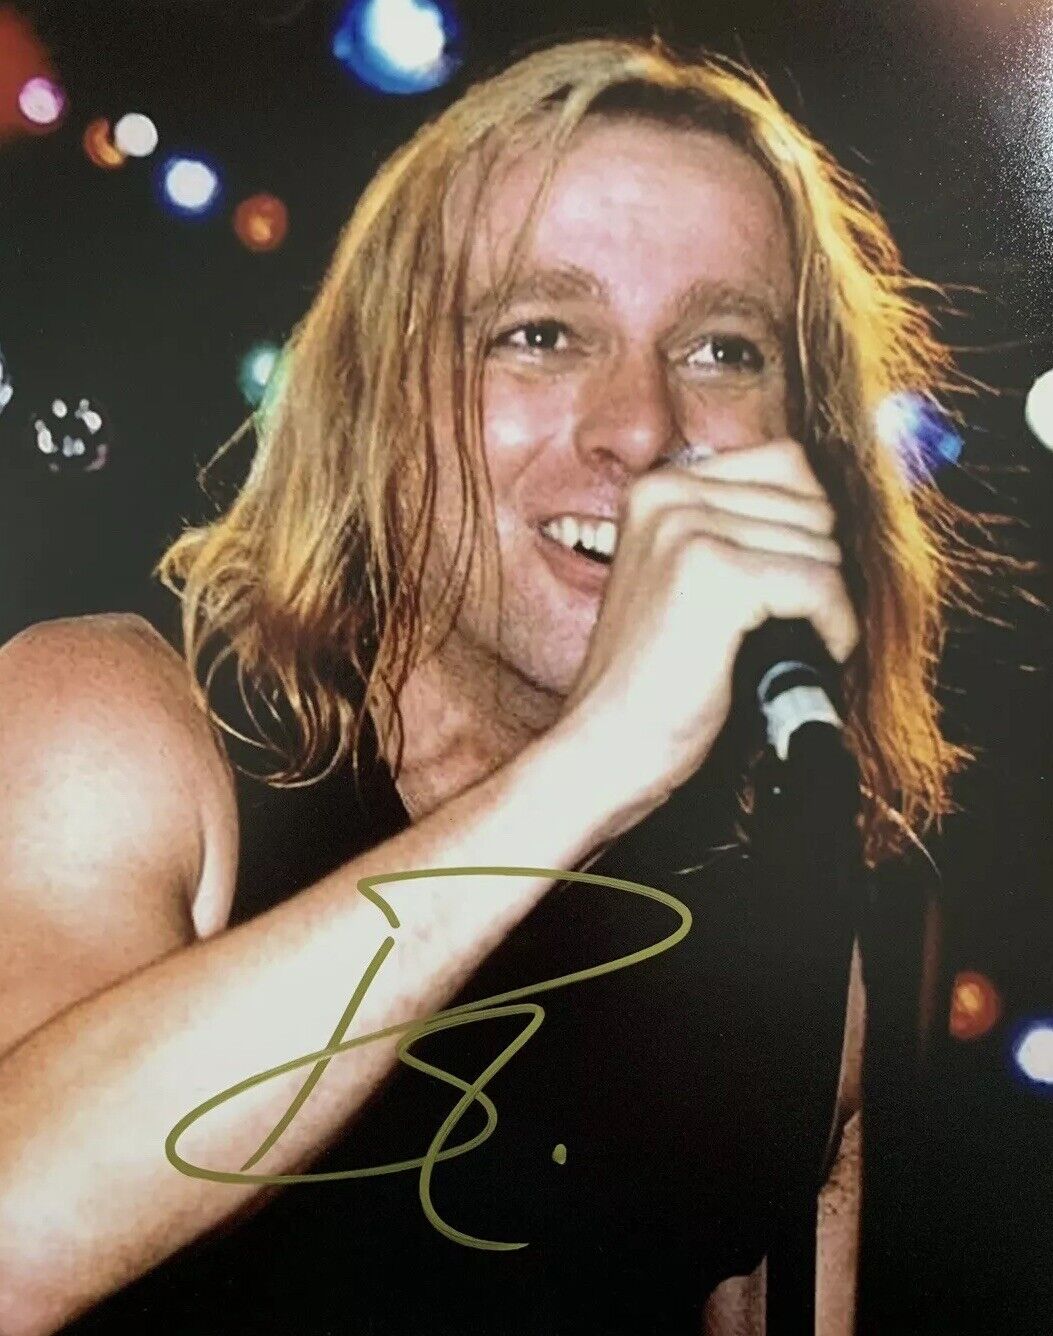 ROBIN ZANDER HAND SIGNED 8x10 Photo Poster painting CHEAP TRICK AUTOGRAPHED AUTHENTIC PROOF